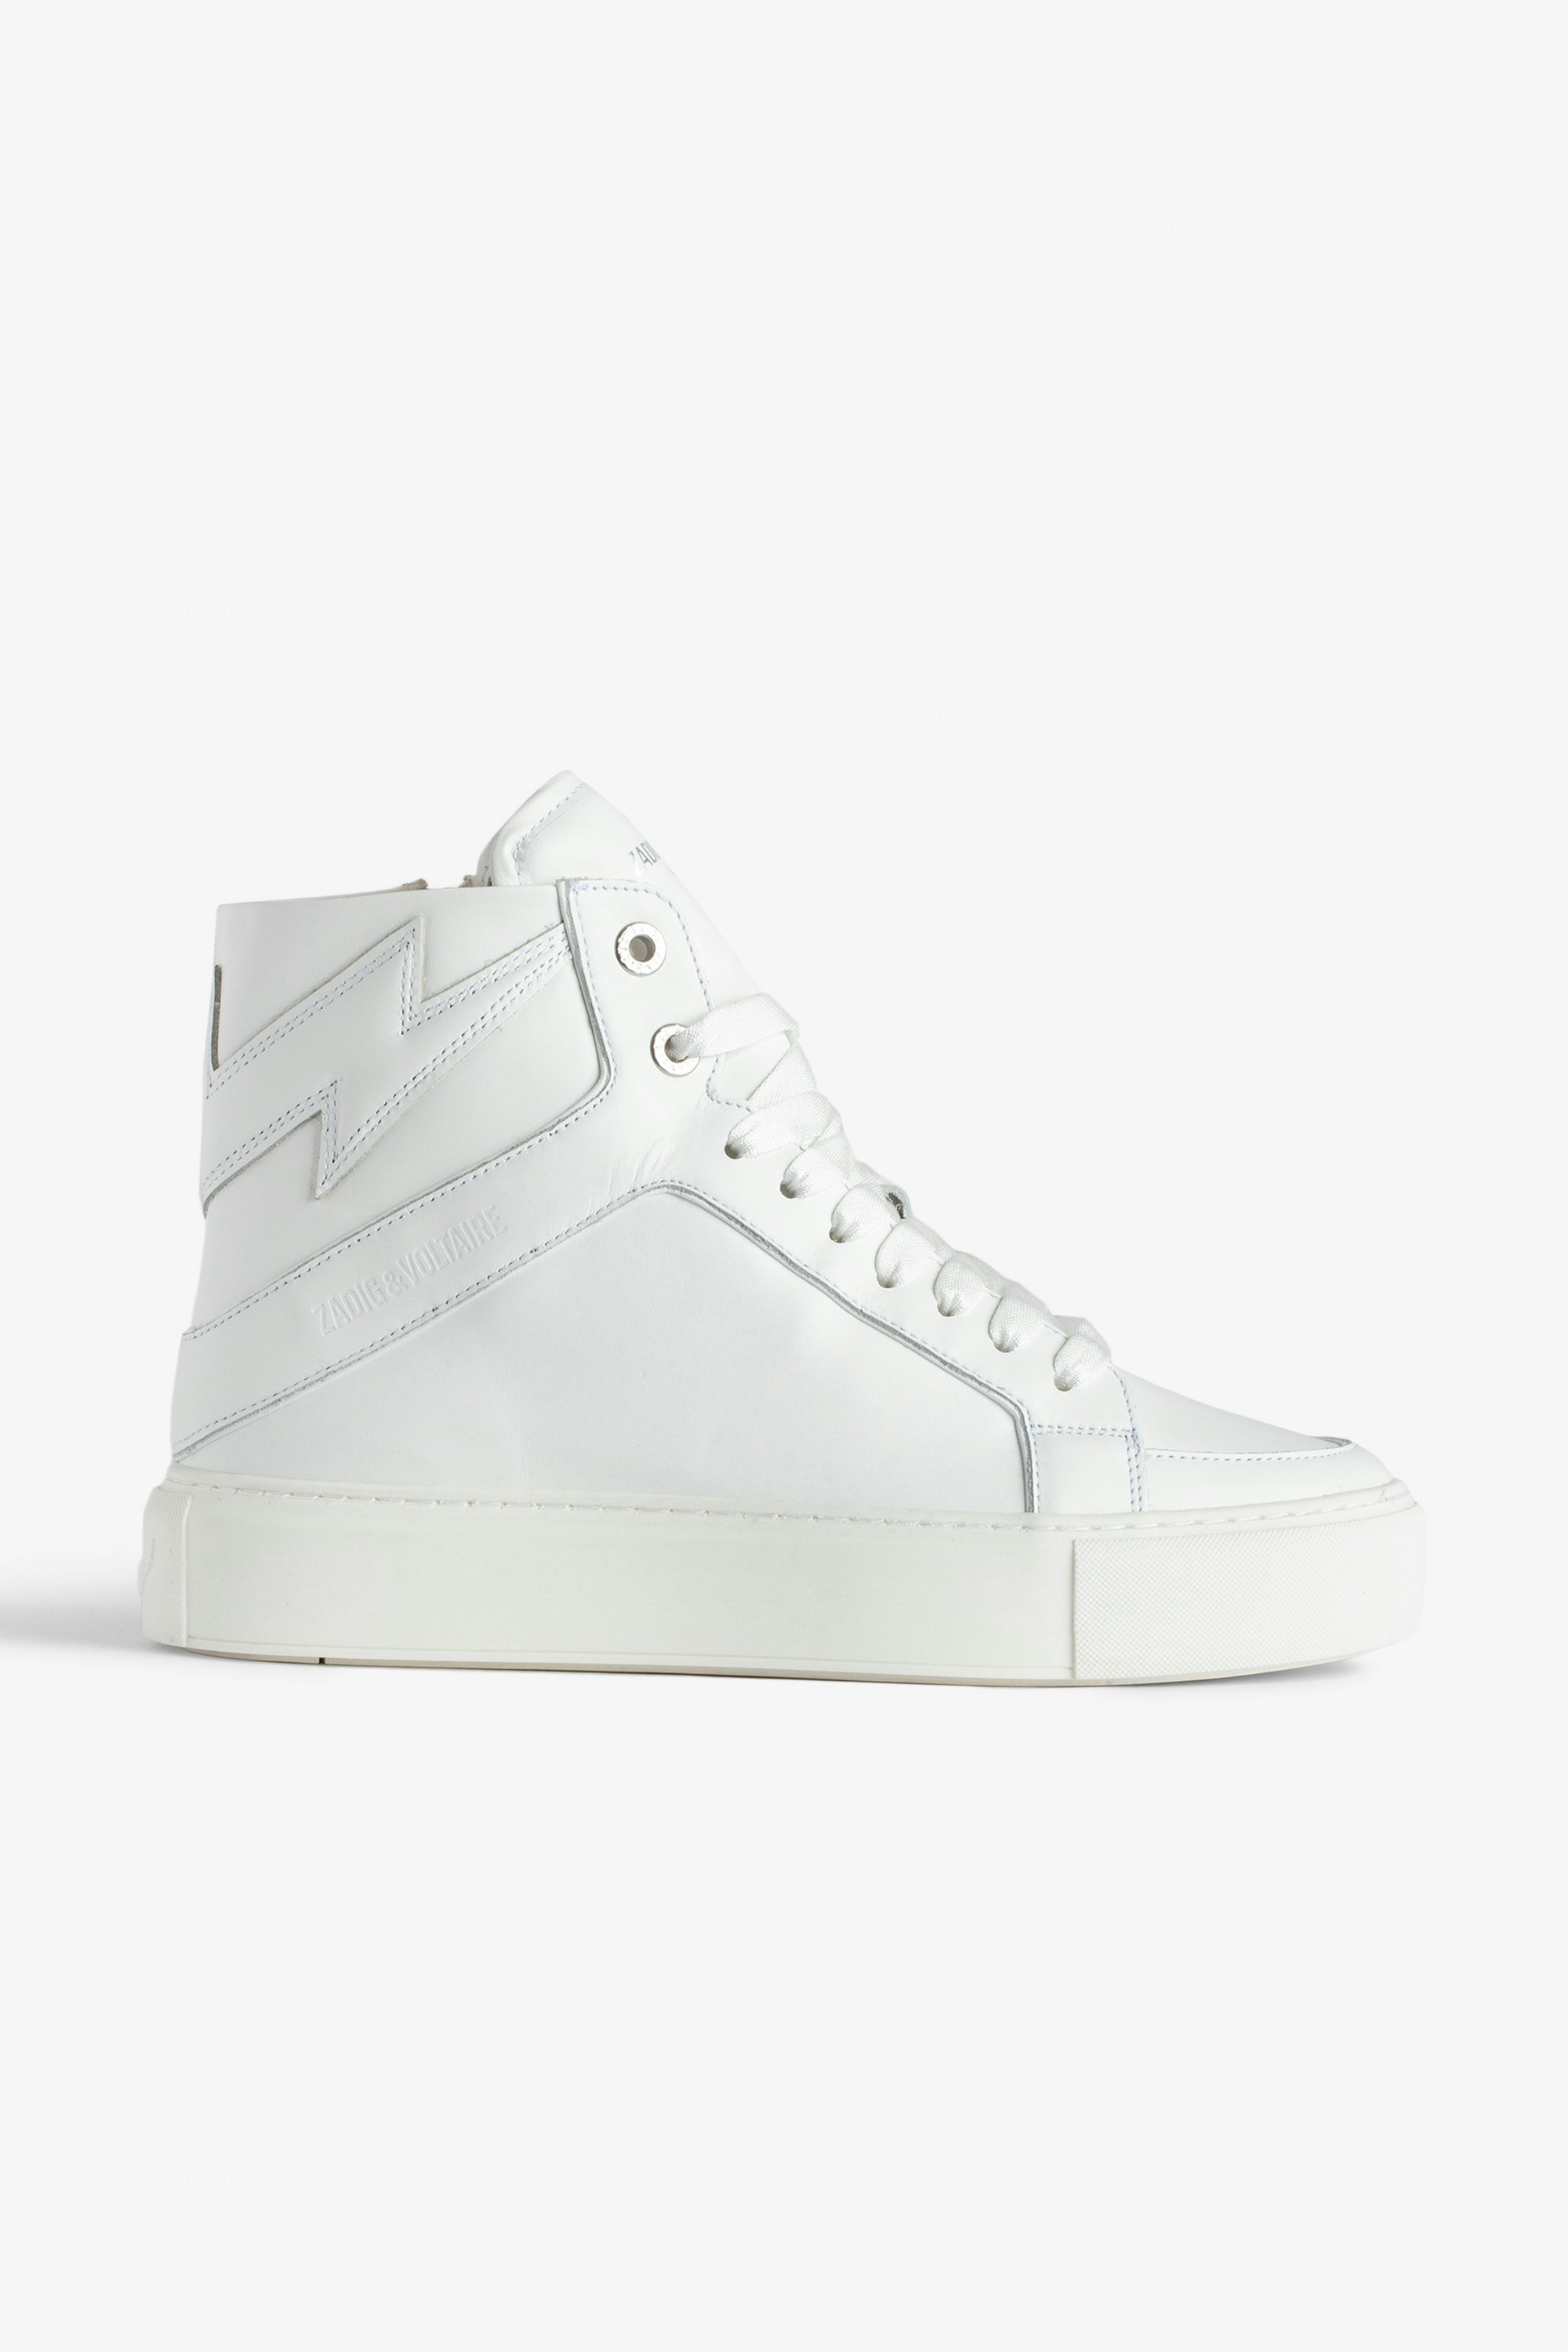 ZV1747 High Flash High-Top Platform Sneakers - Women’s white smooth leather high-top sneakers with lightning bolt panels and chunky sole.